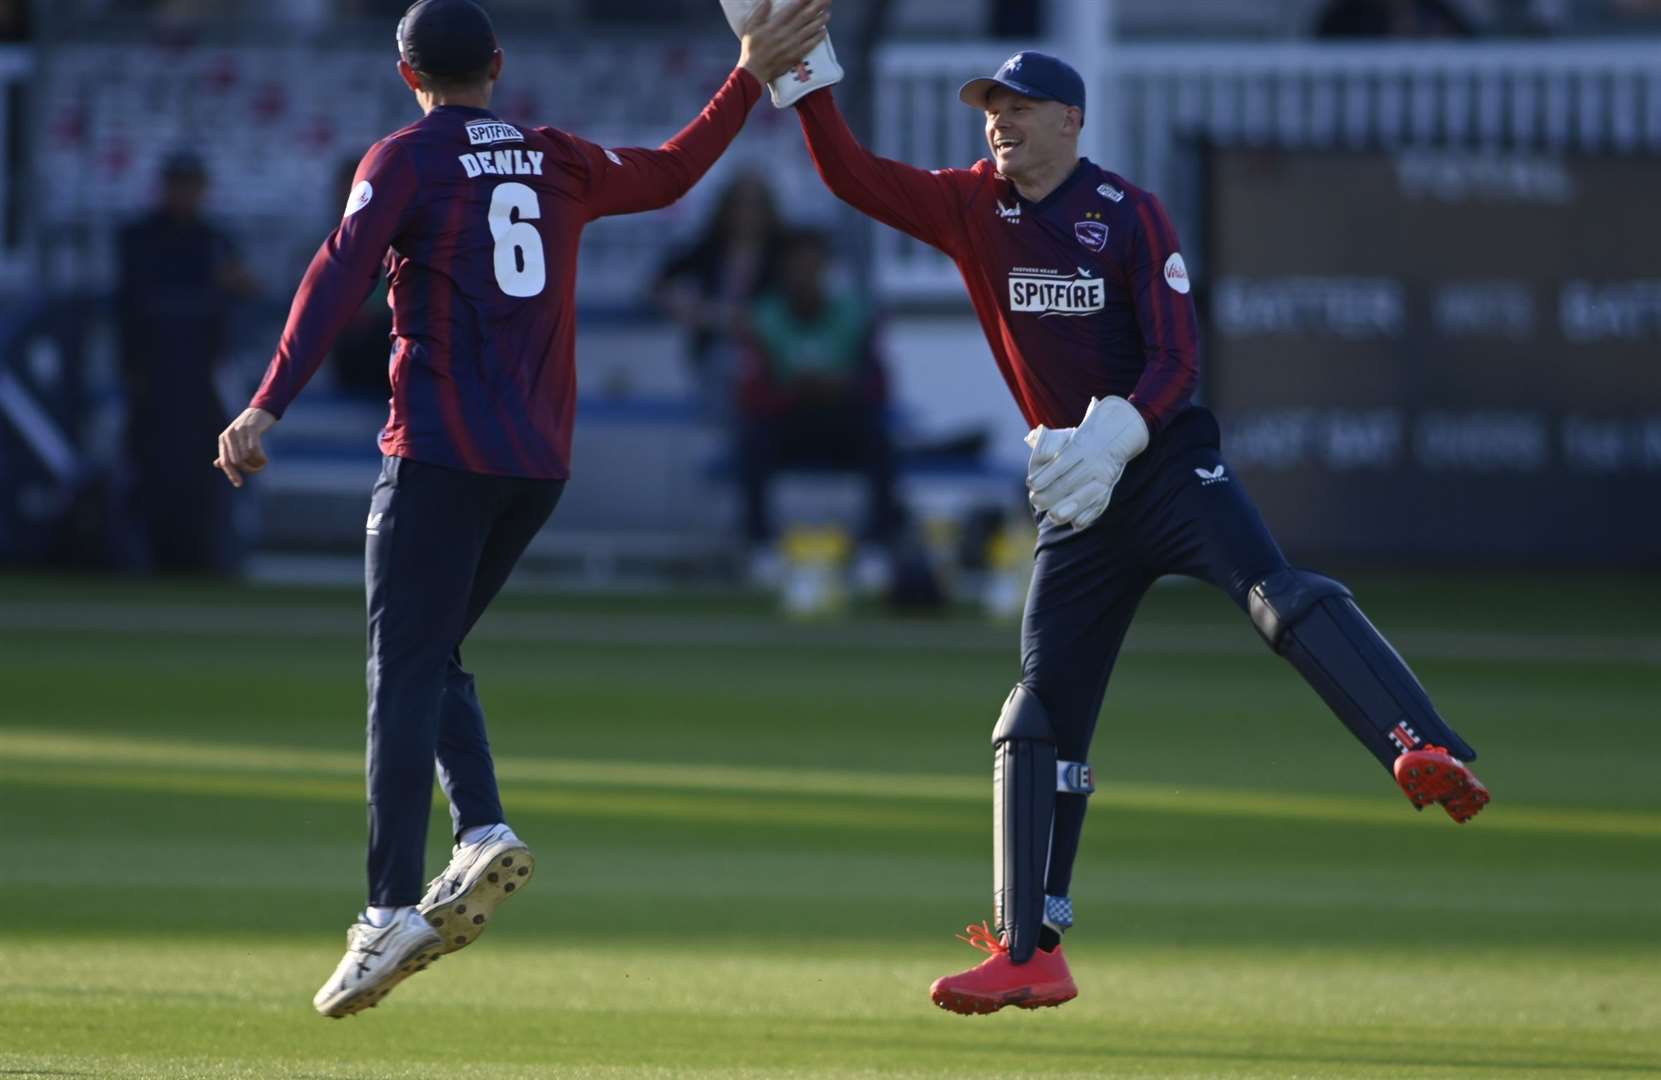 Joe Denly and Sam Billings celebrate another wicket as Spitfires beat Gloucestershire at Canterbury in their opening-day T20 game. Picture: Barry Goodwin